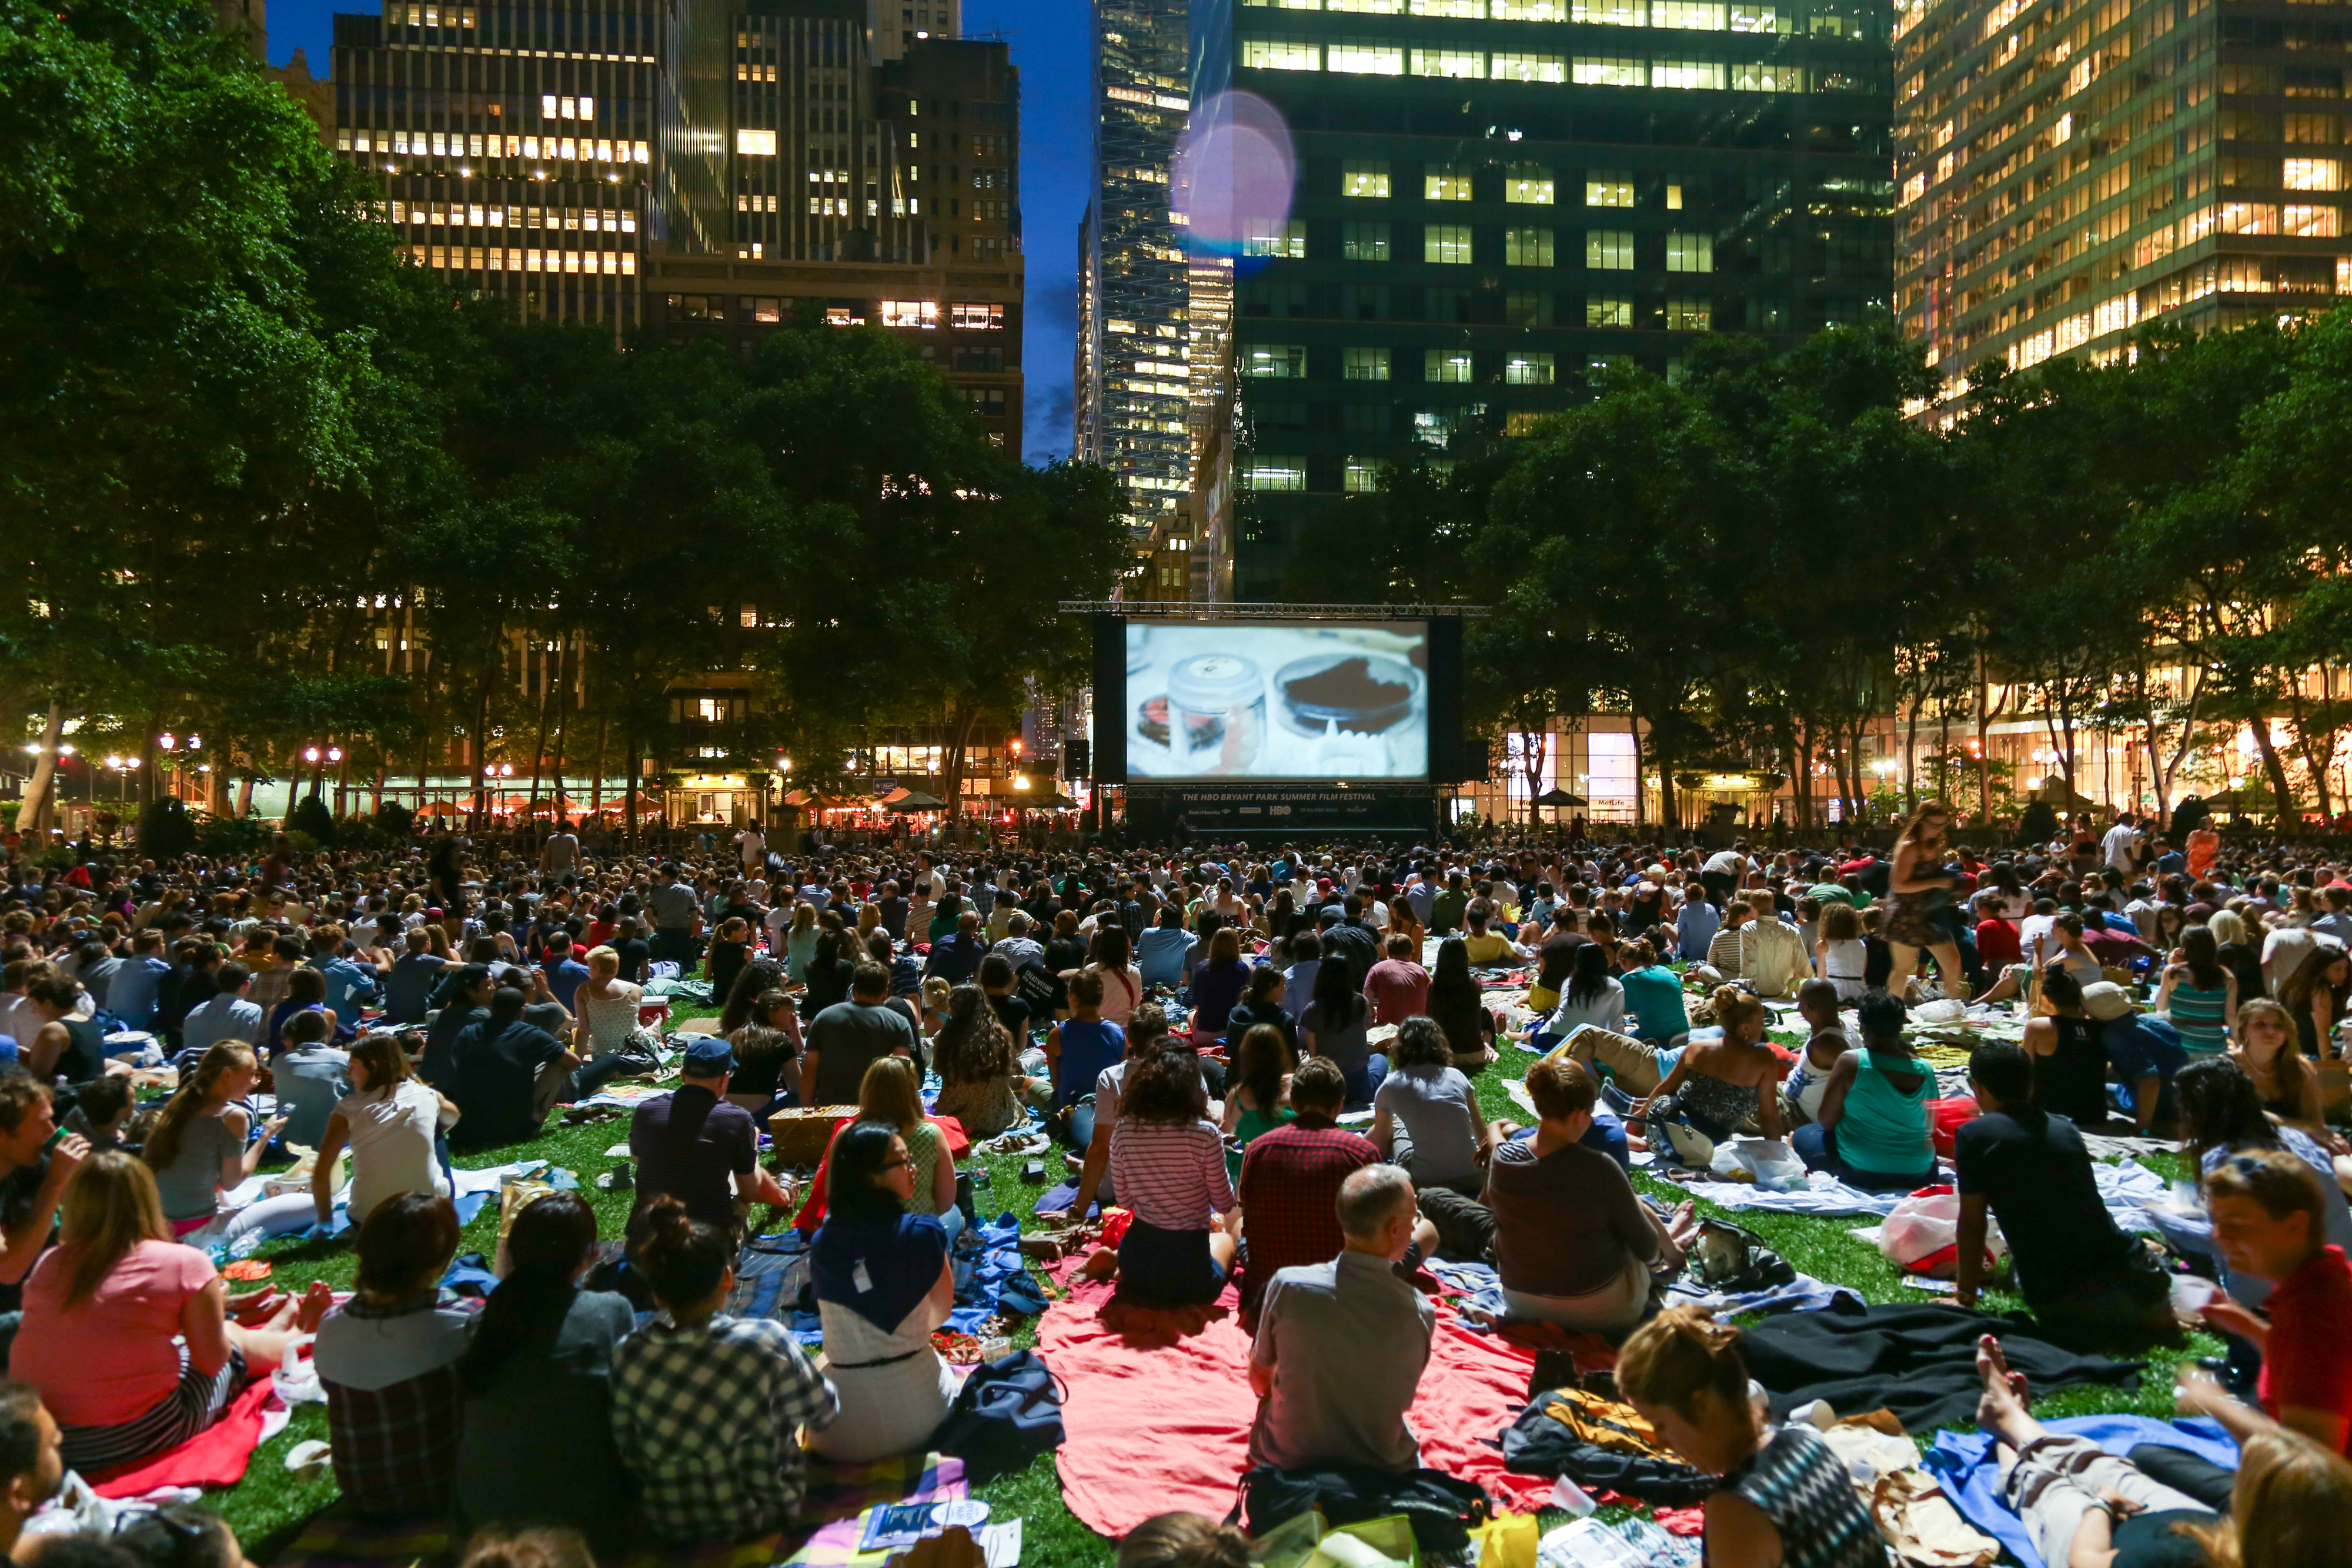 Outdoor movie screening event with large audience sitting on blankets in a park at dusk